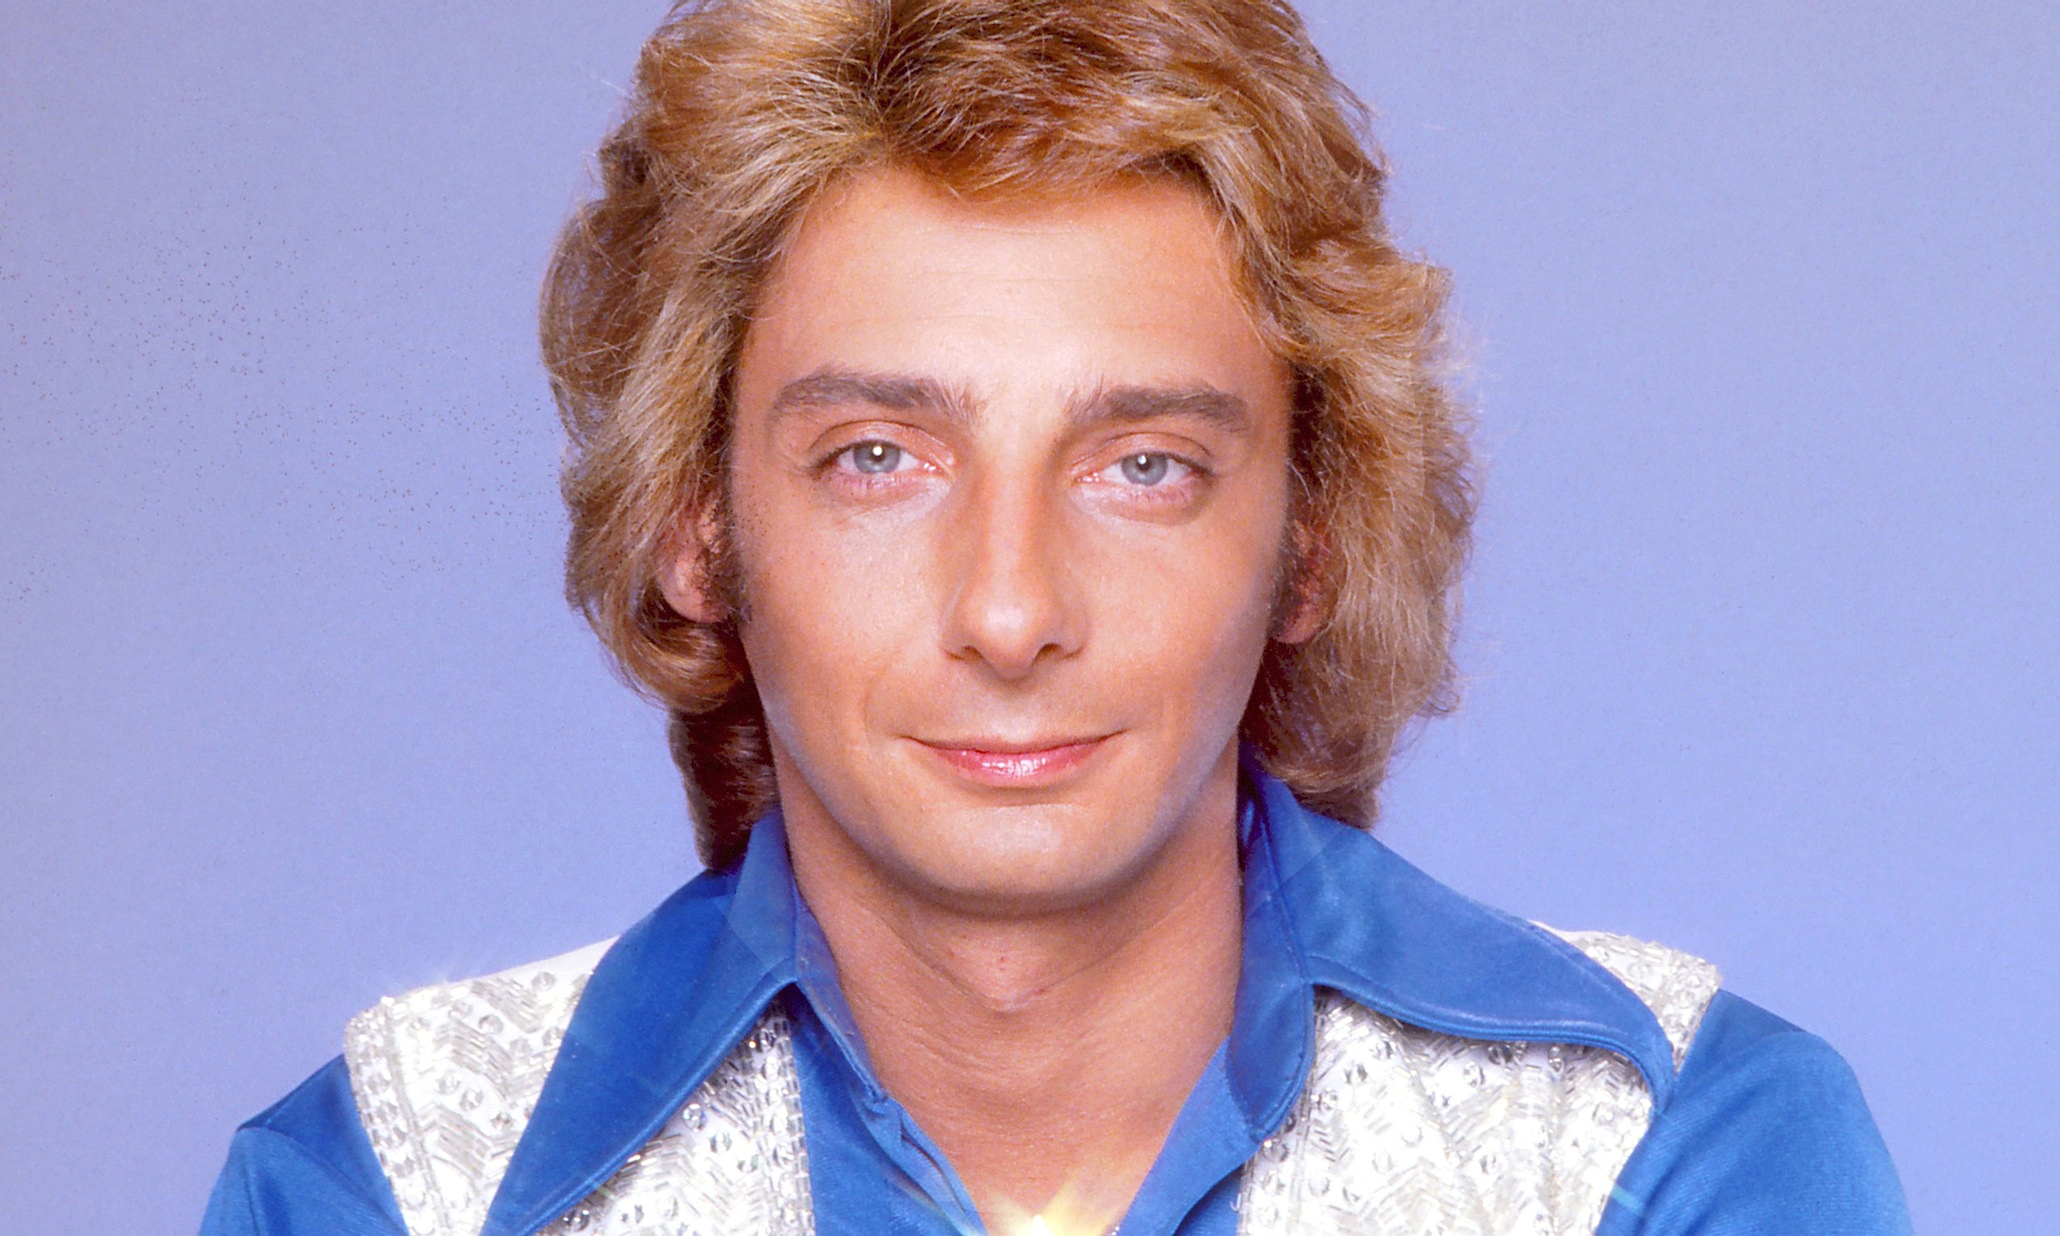 Barry Manilow is gay, and has married his longtime manager Garry Kief